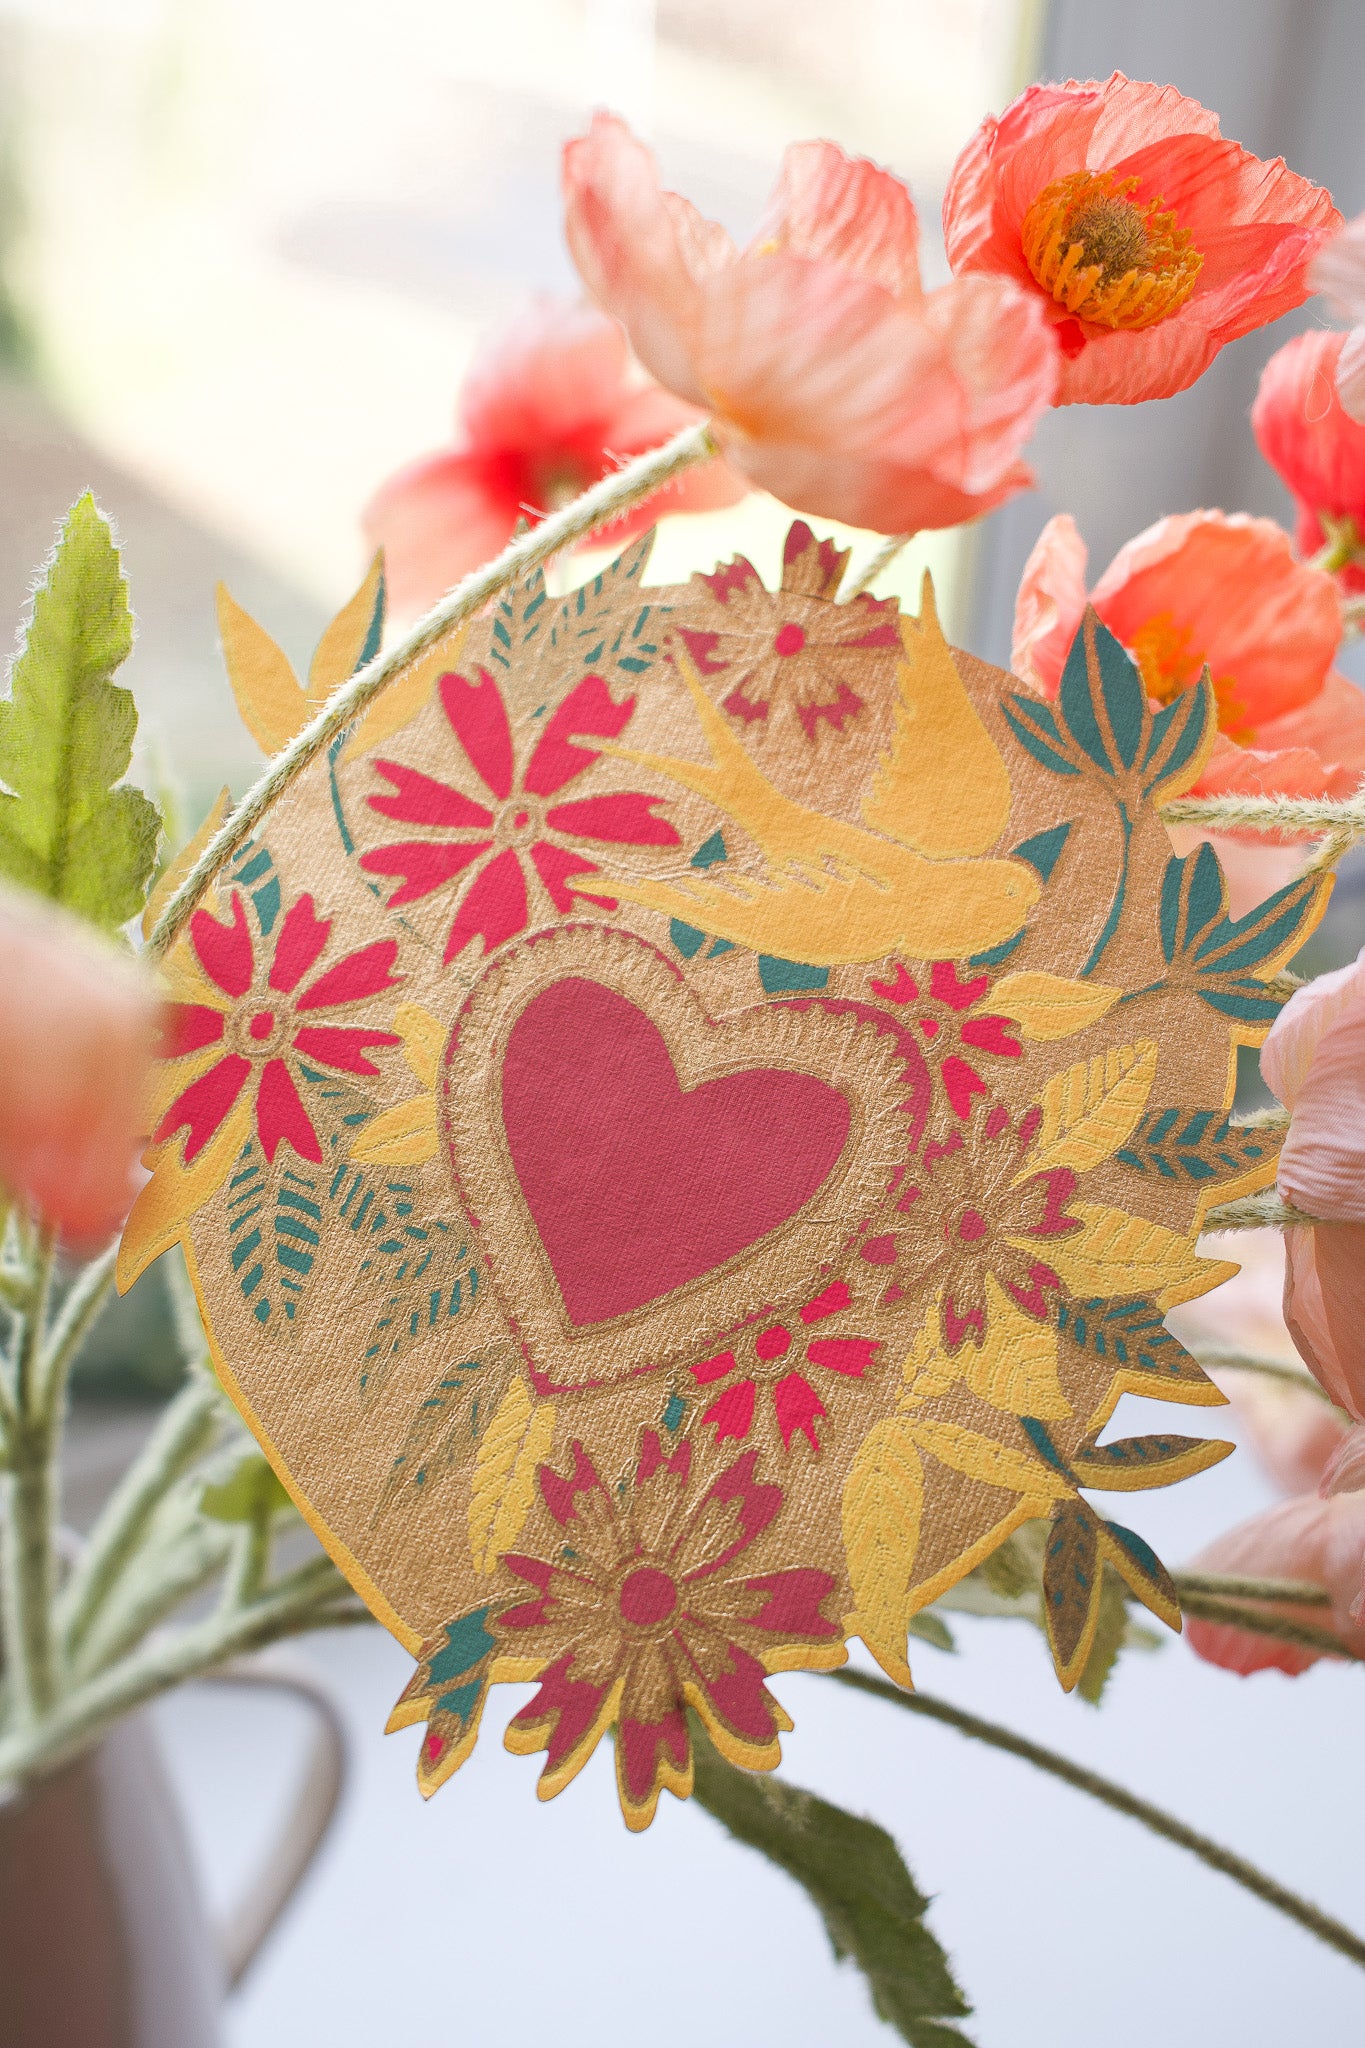 Floral Heart Greeting Card